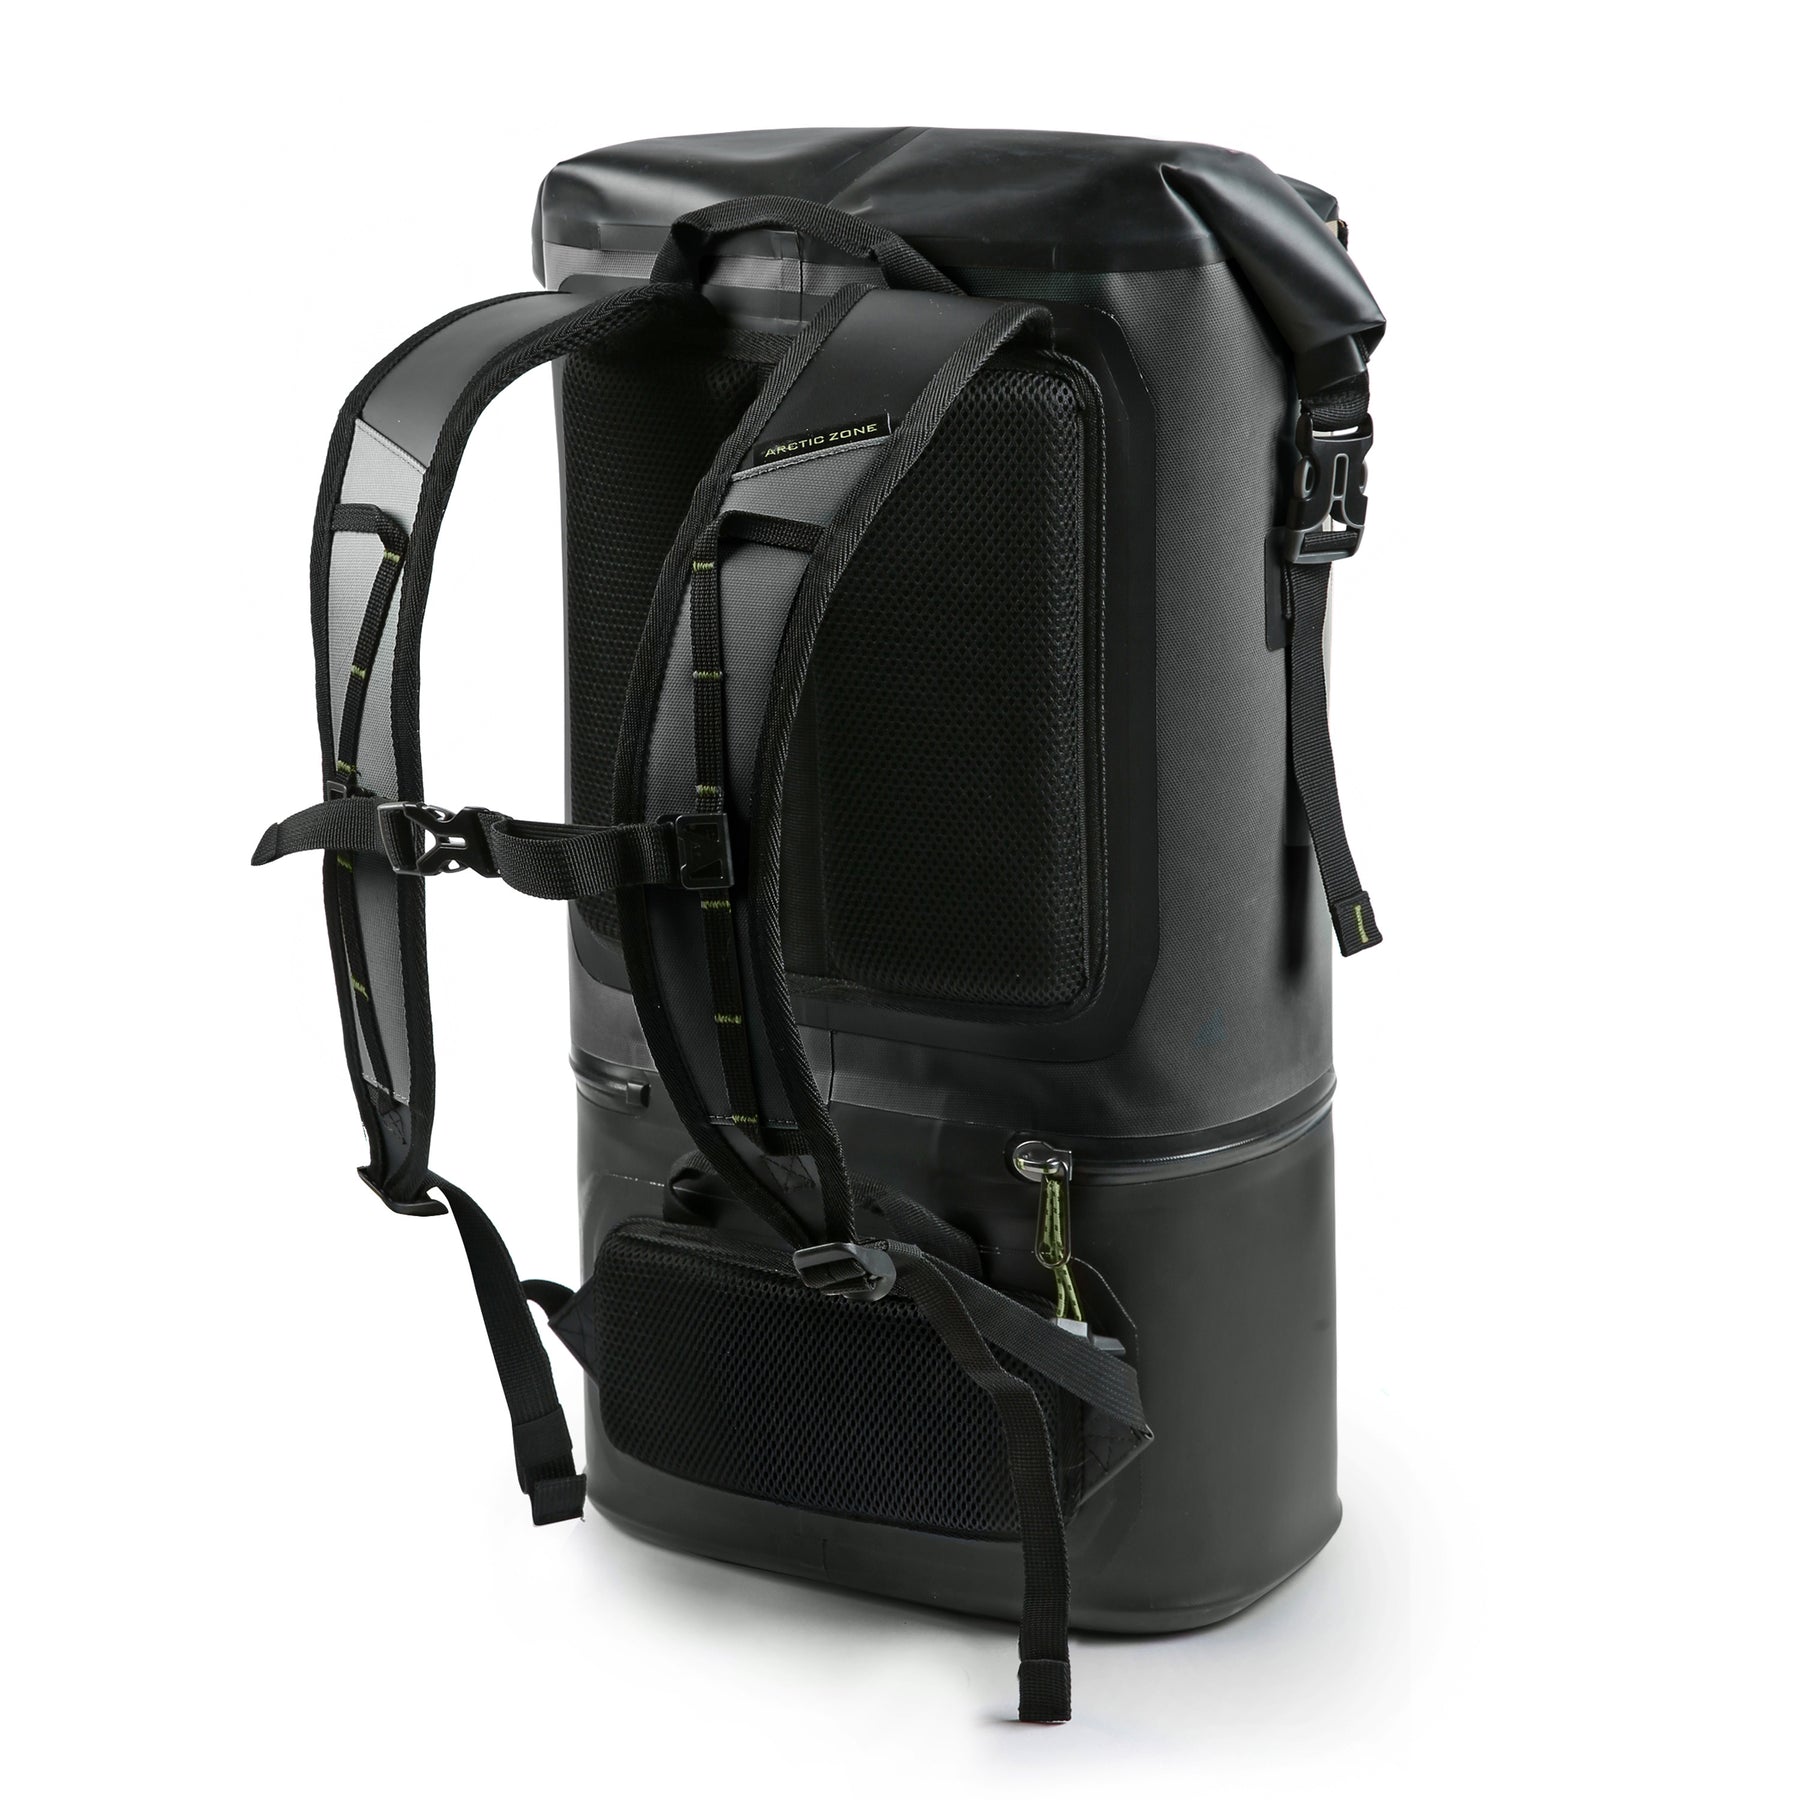 24 Can Welded Backpack Cooler